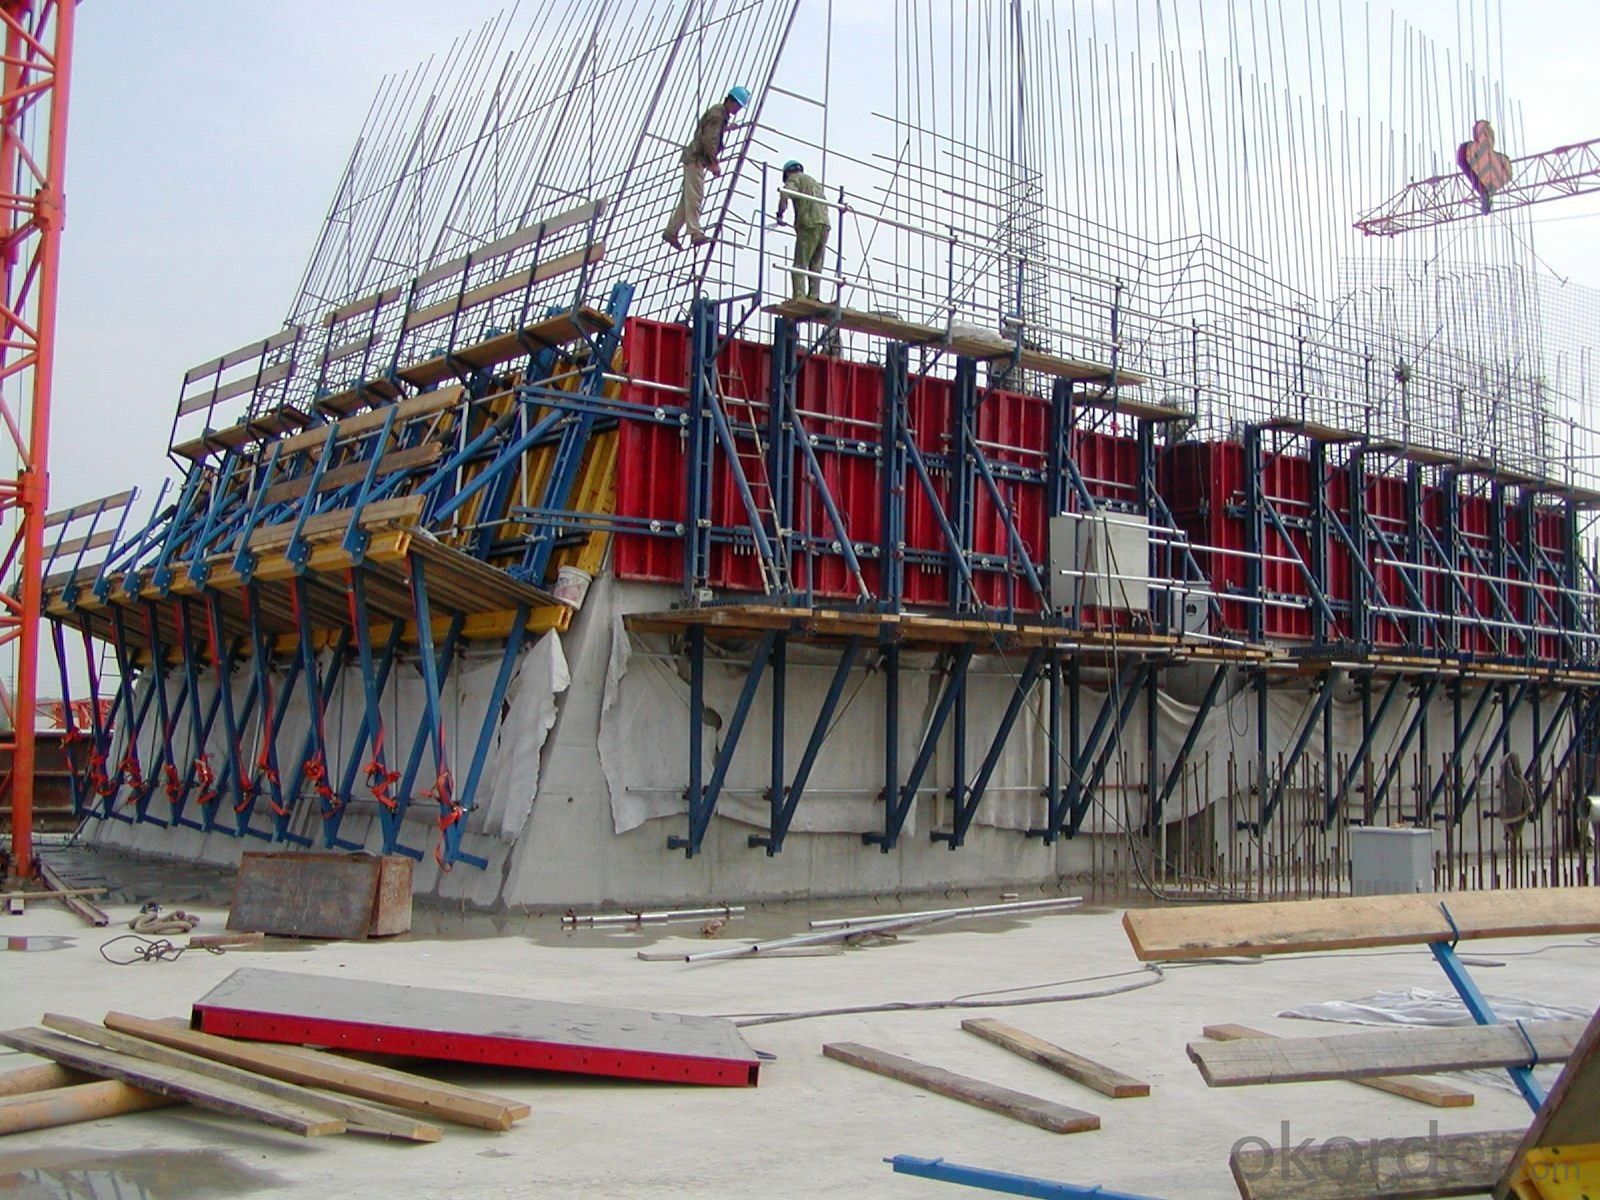 Safe Single - Side Climbing System / Climbing Formwork For Dams , Cooling Towers